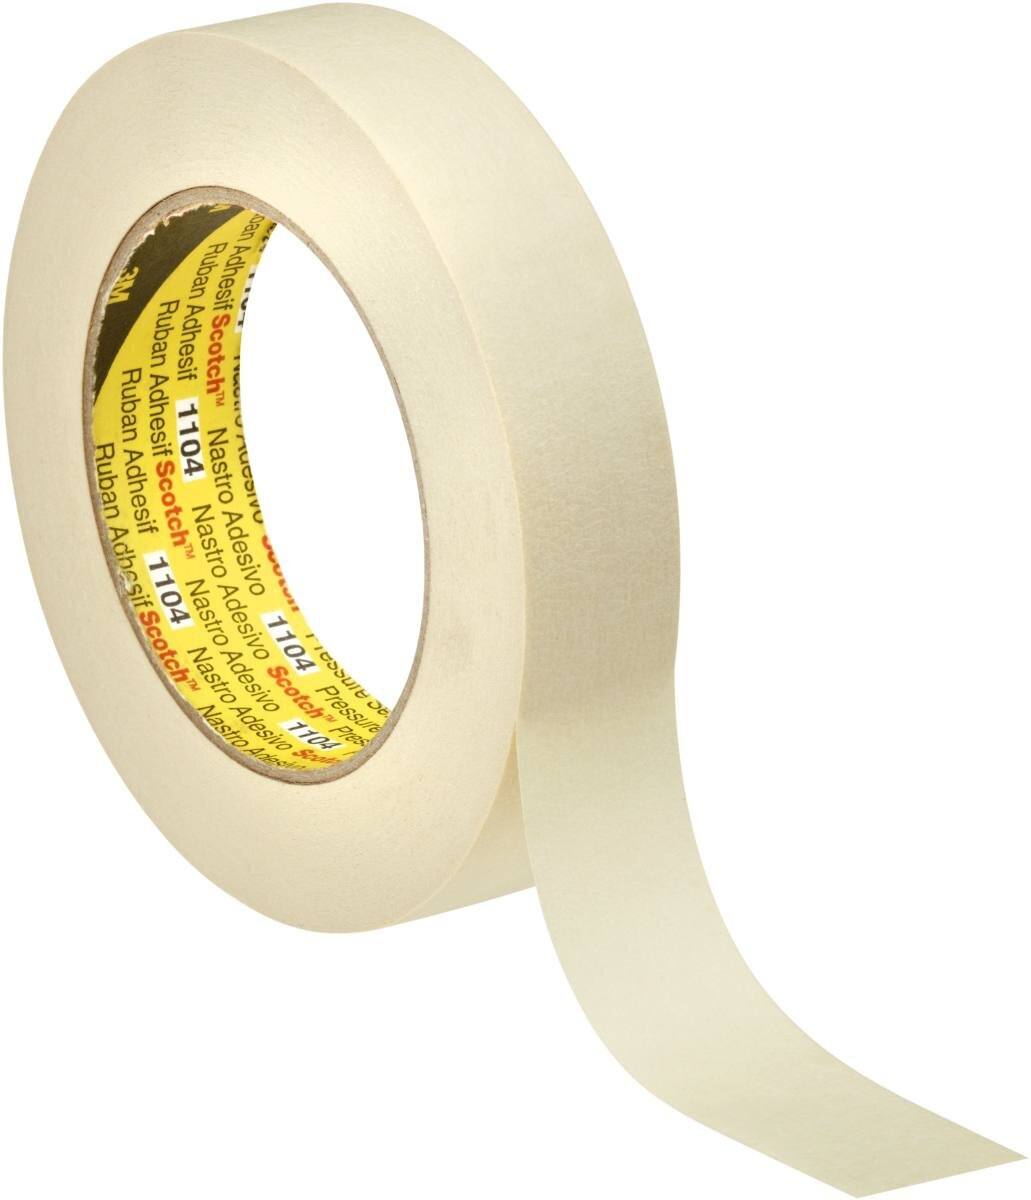  3M Scotch Special Painting Masking Tape 1104, Beige, 18 mm x 50 m, 0.155 mm, 0.155 mm